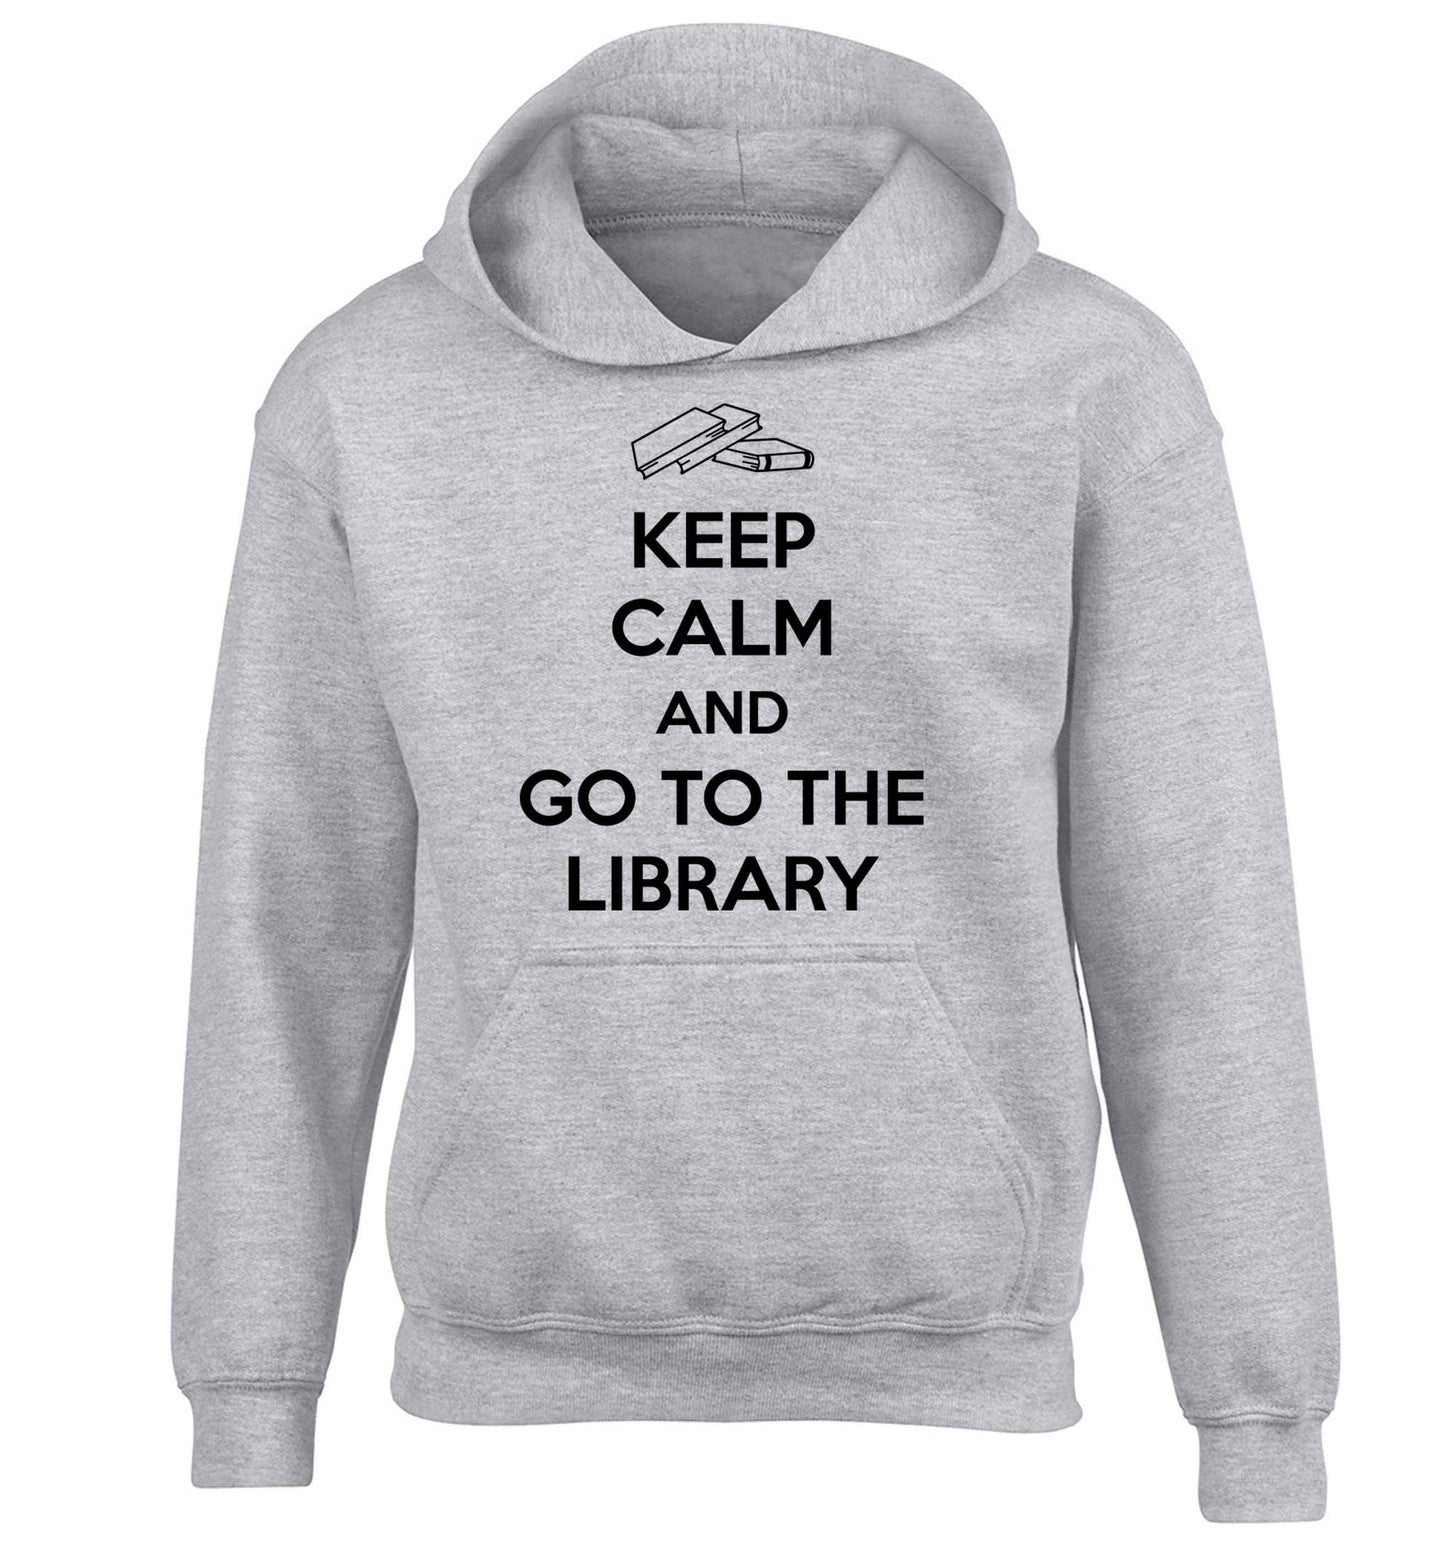 Keep calm and go to the library children's grey hoodie 12-13 Years